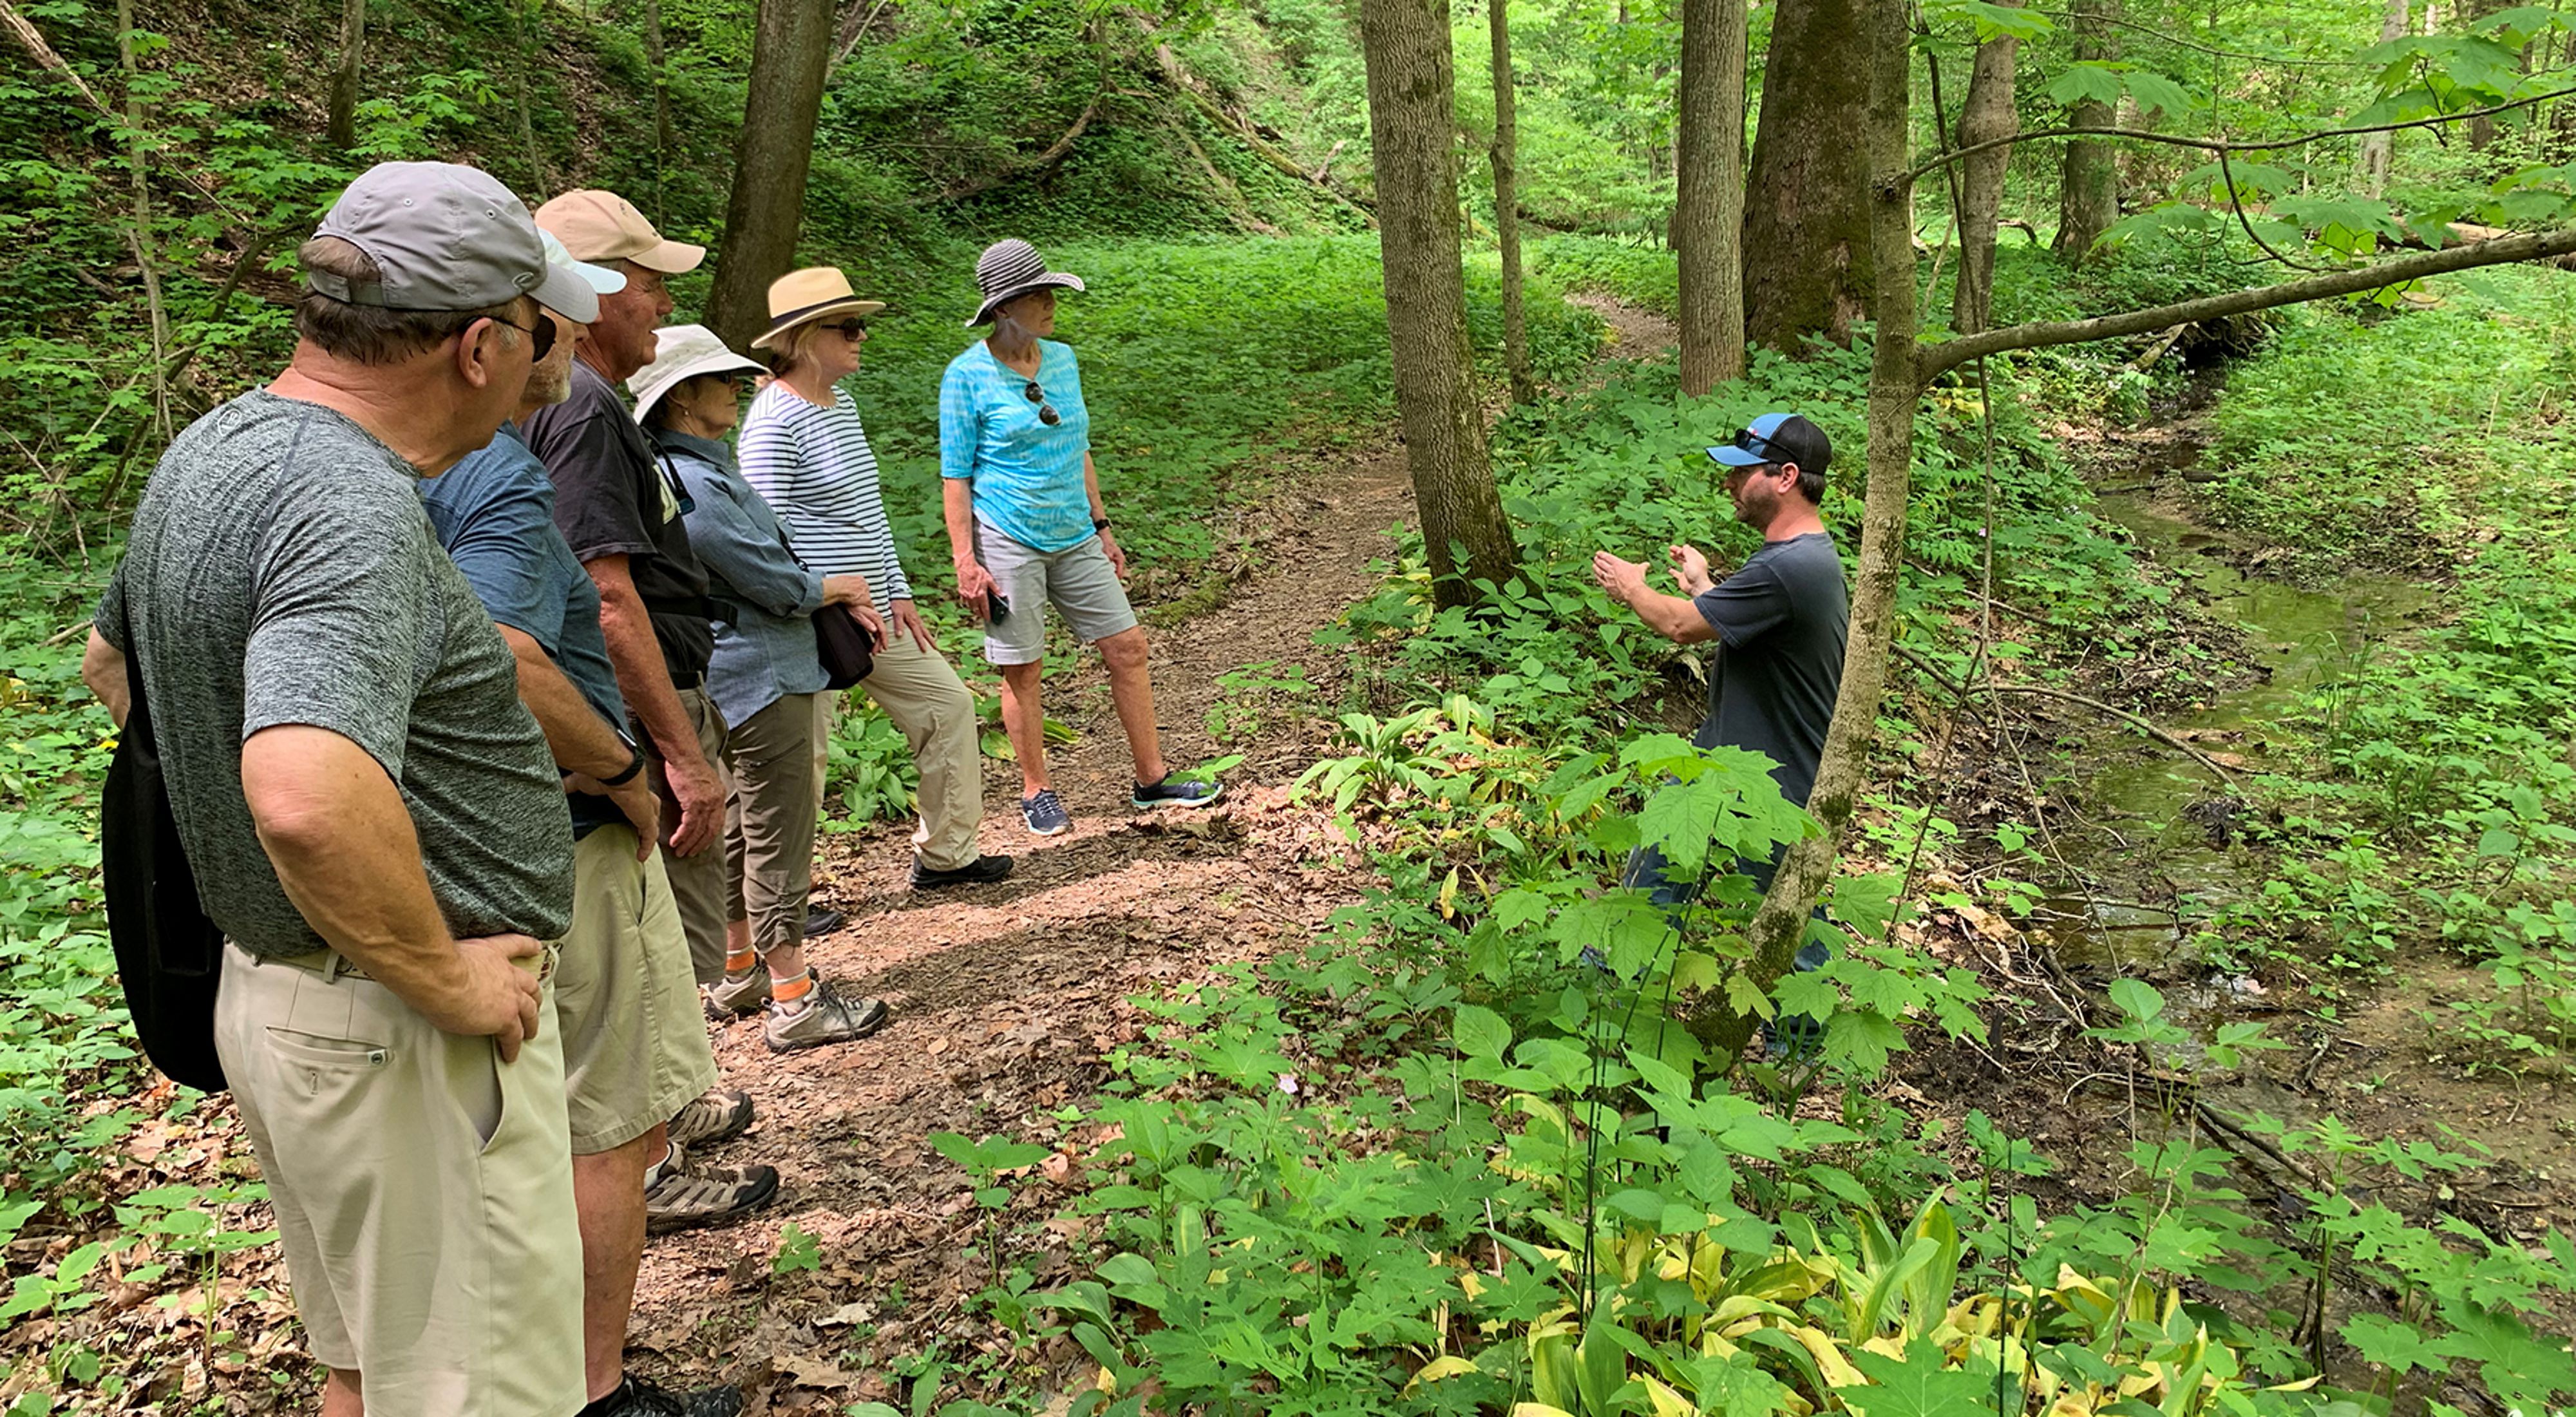 TNC's Jesse Moore leads a small group of hikers through Big Walnut Nature Preserve in spring.